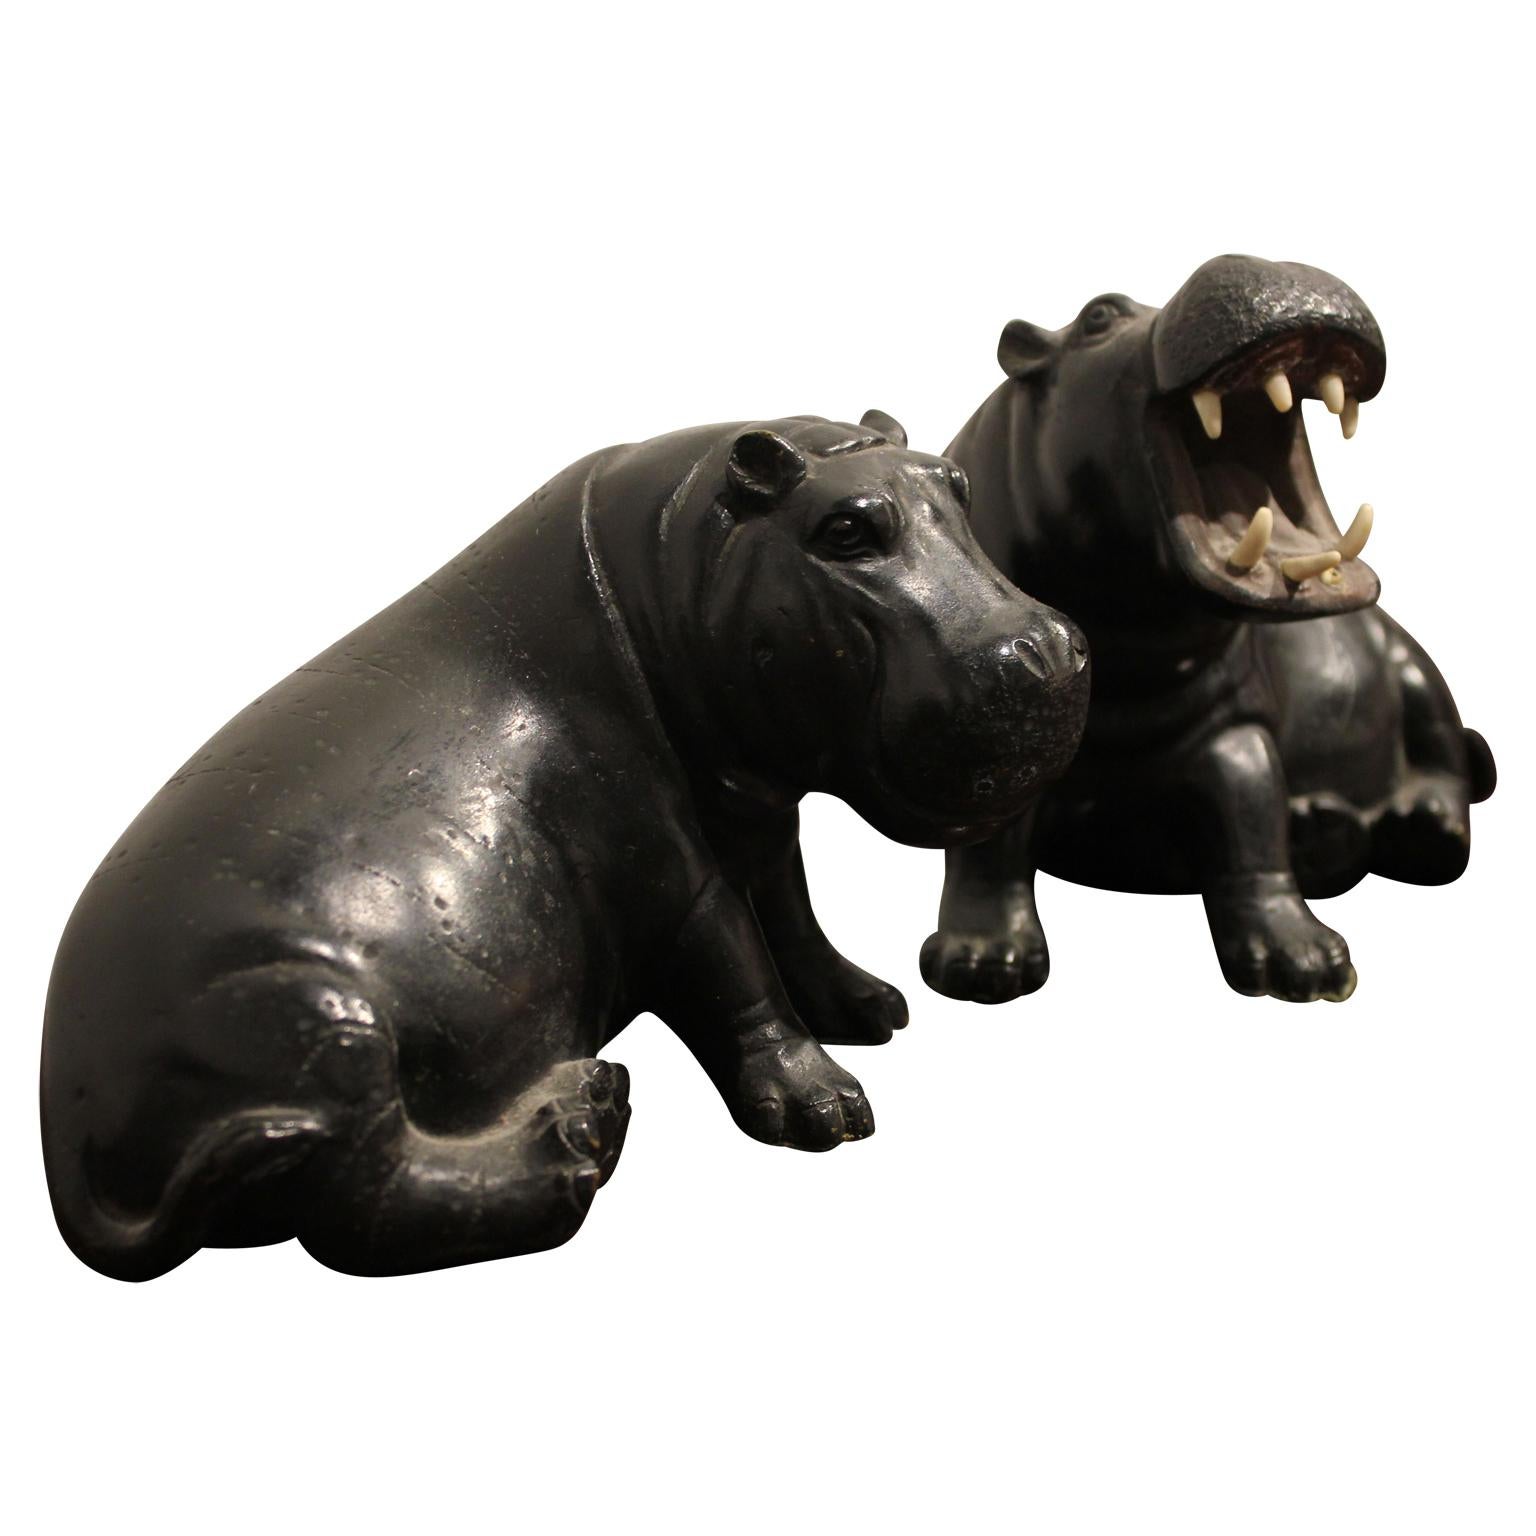 Pair of incredibly detailed brass hippo sculptures. The hippo with an open mouth has highly realistic teeth. Sold as a set of 2. 

Open Mouth Hippo Dimensions: H 4.75 in. x W 6 in. D 4 in.
Closed Mouth Hippo Dimensions: H 4 in. x W 6 in. x D 4.25 in